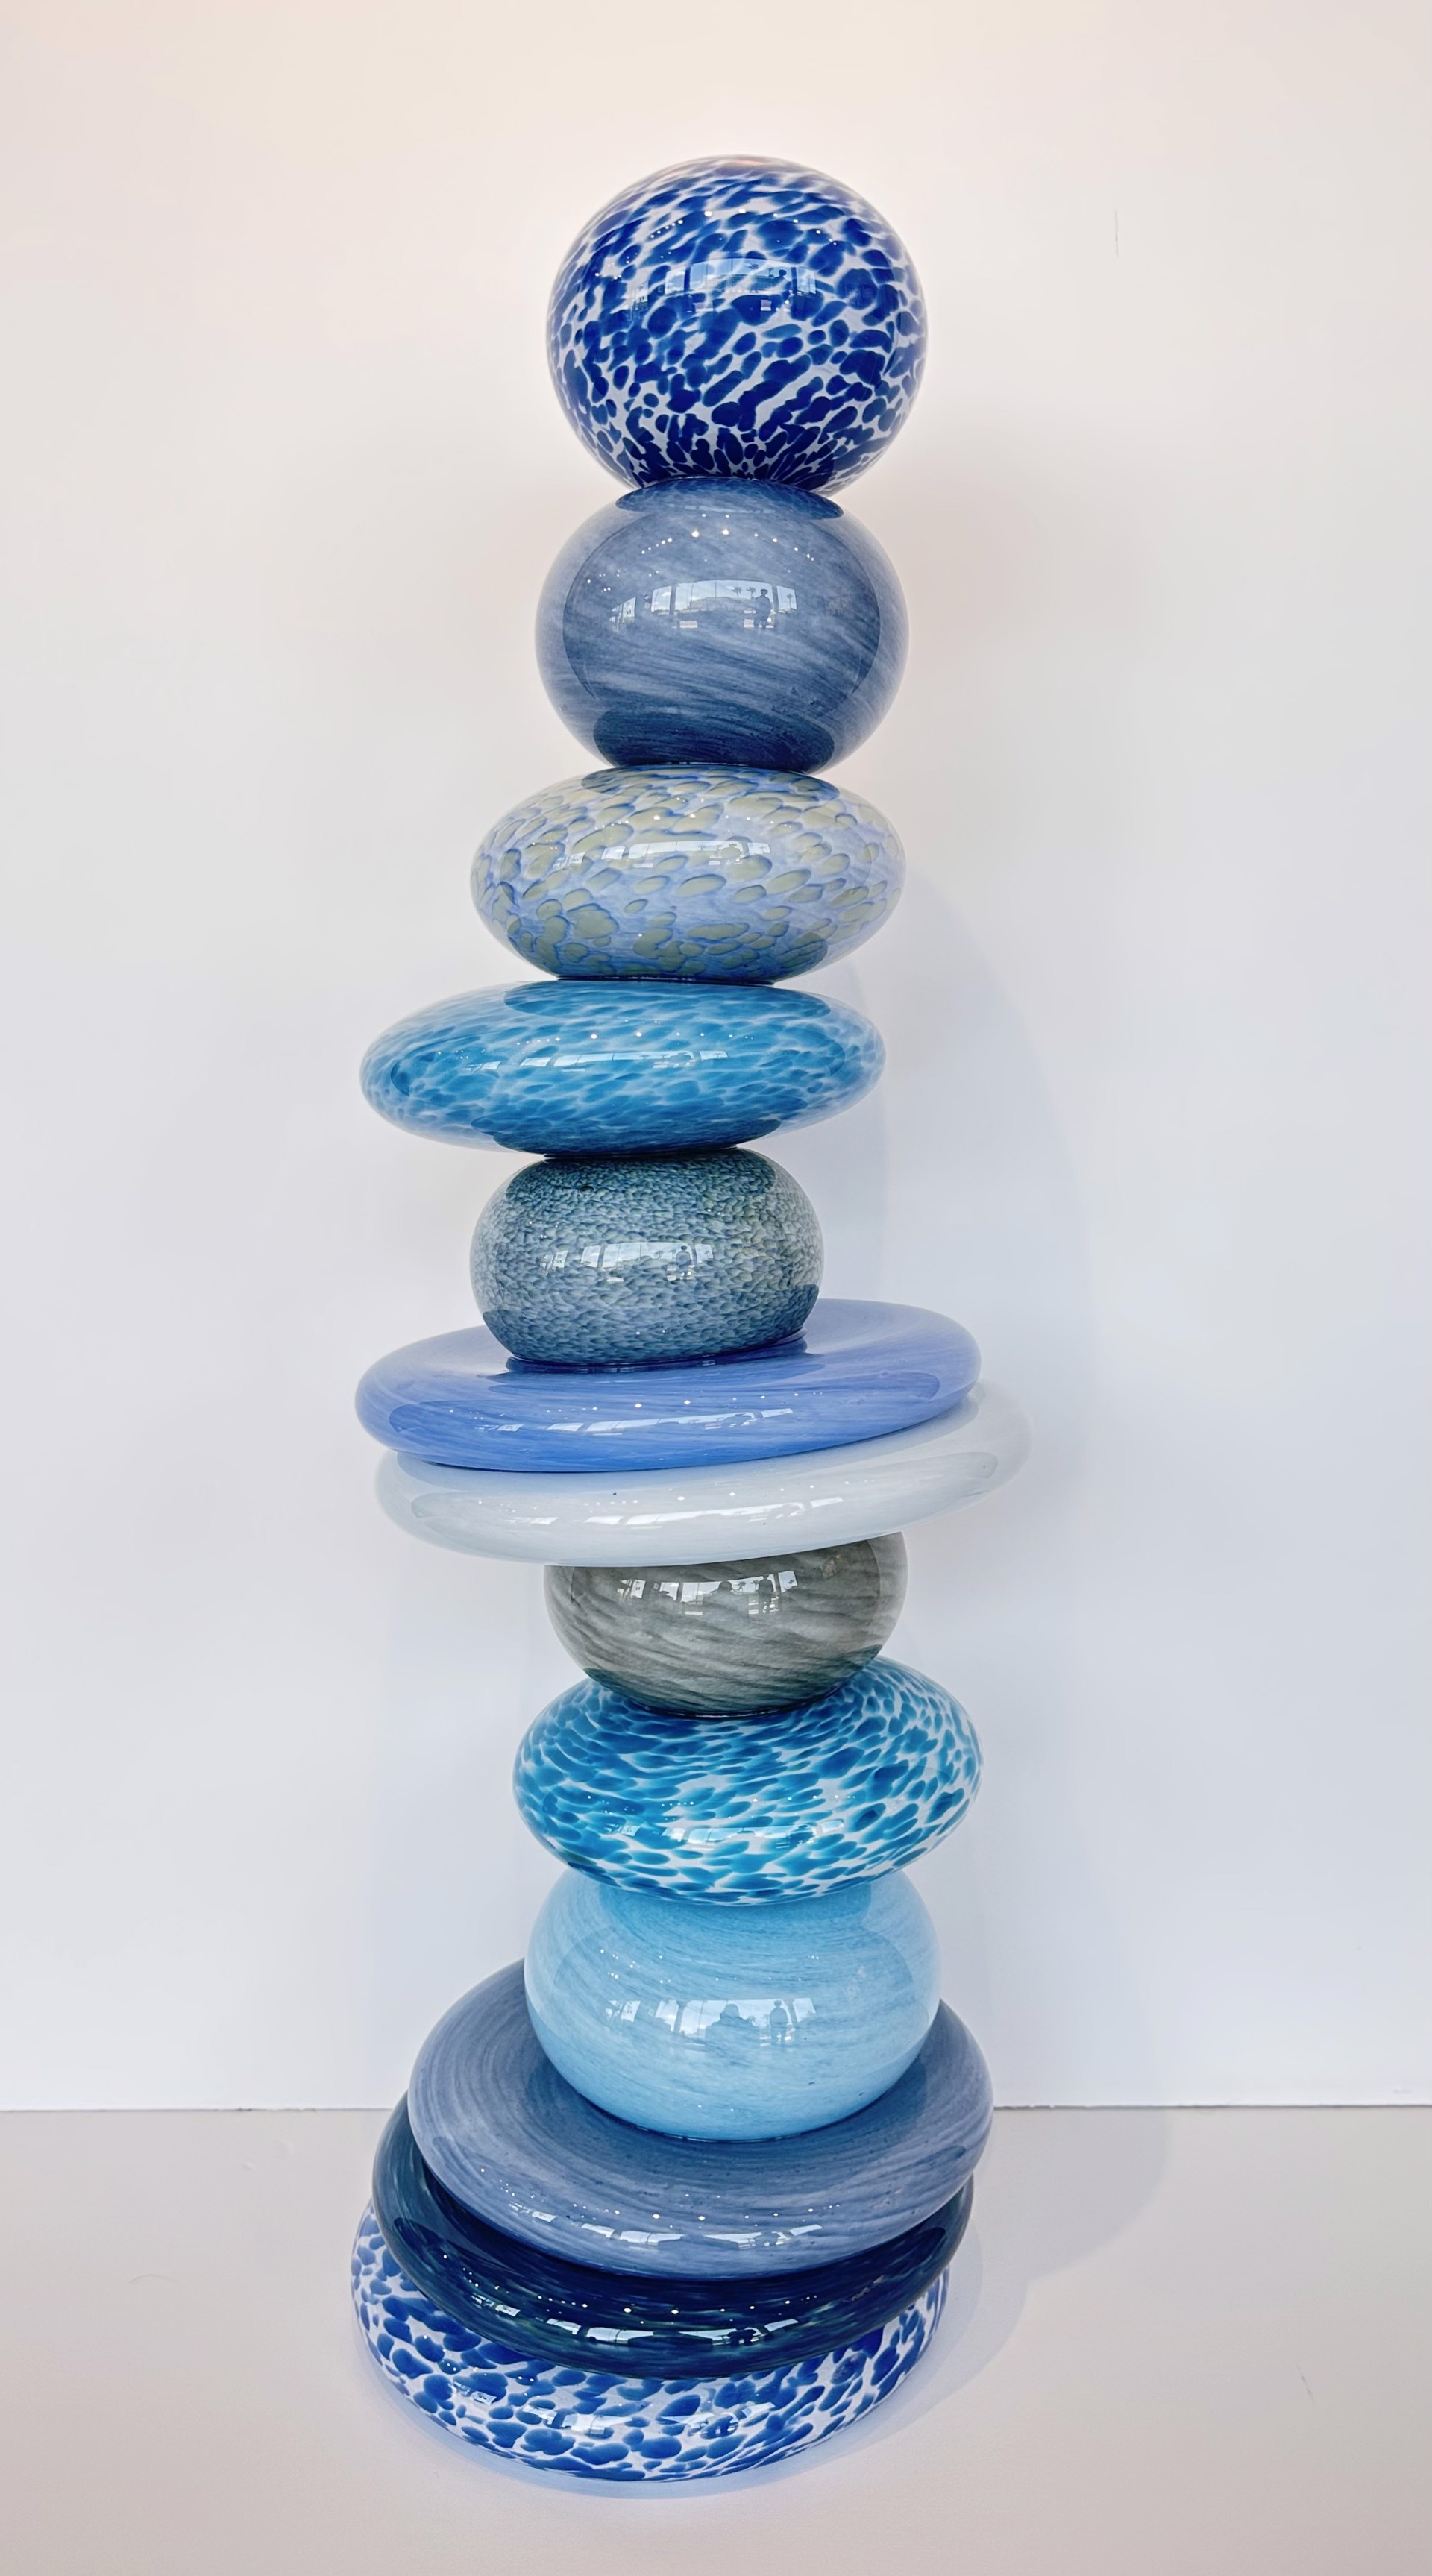 Pohacu Stacked Stones Blue (13) by Robert Madvin